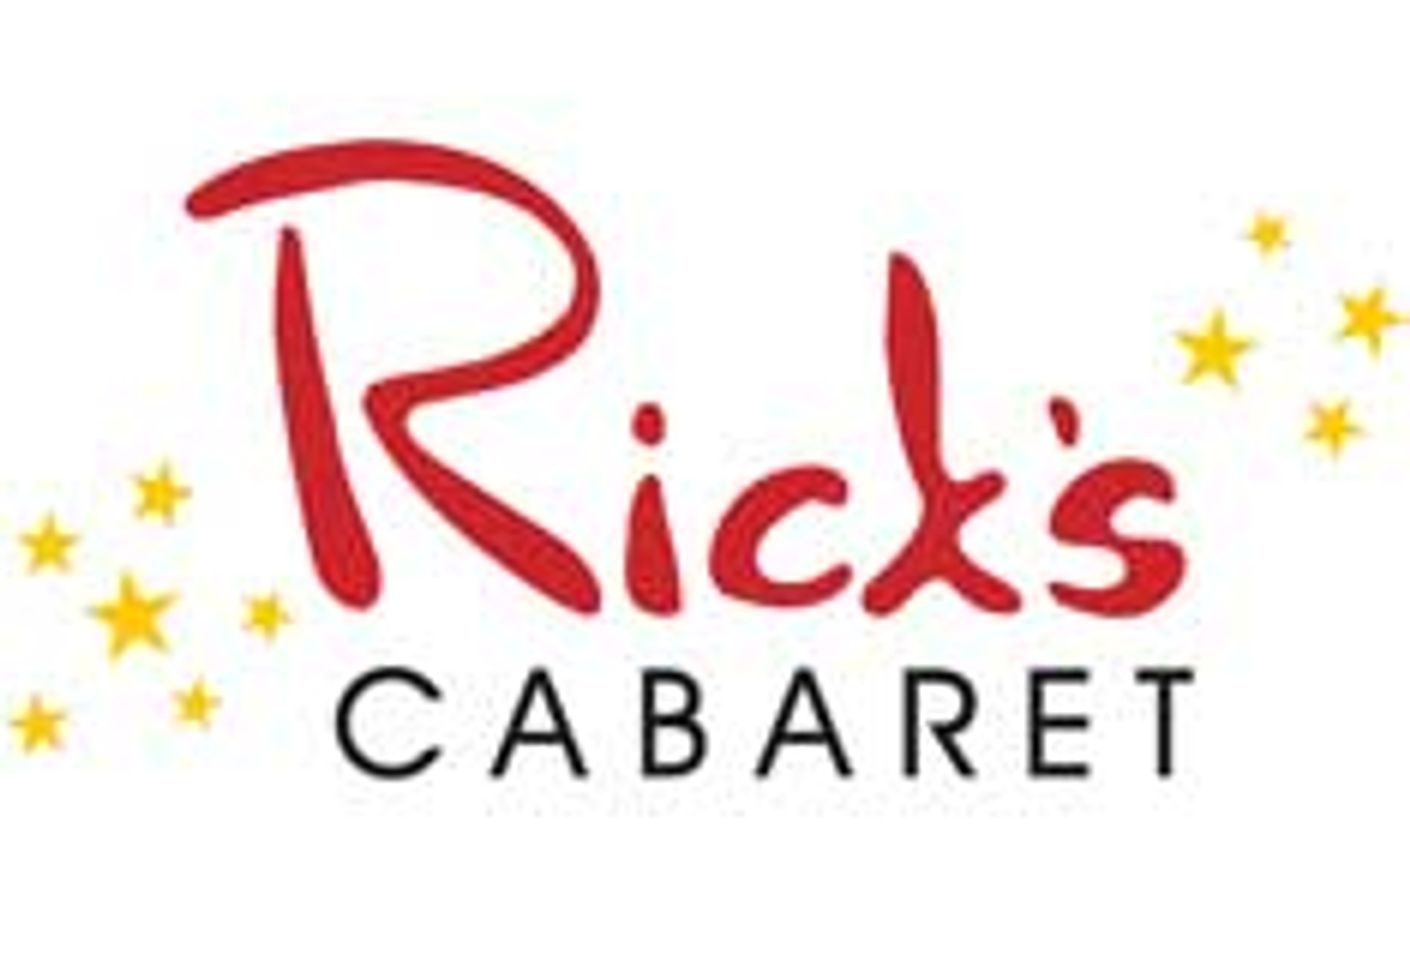 Rick’s Cabaret Subsidiary Purchases Two Real Estate Parcels in Dallas/FT. Worth